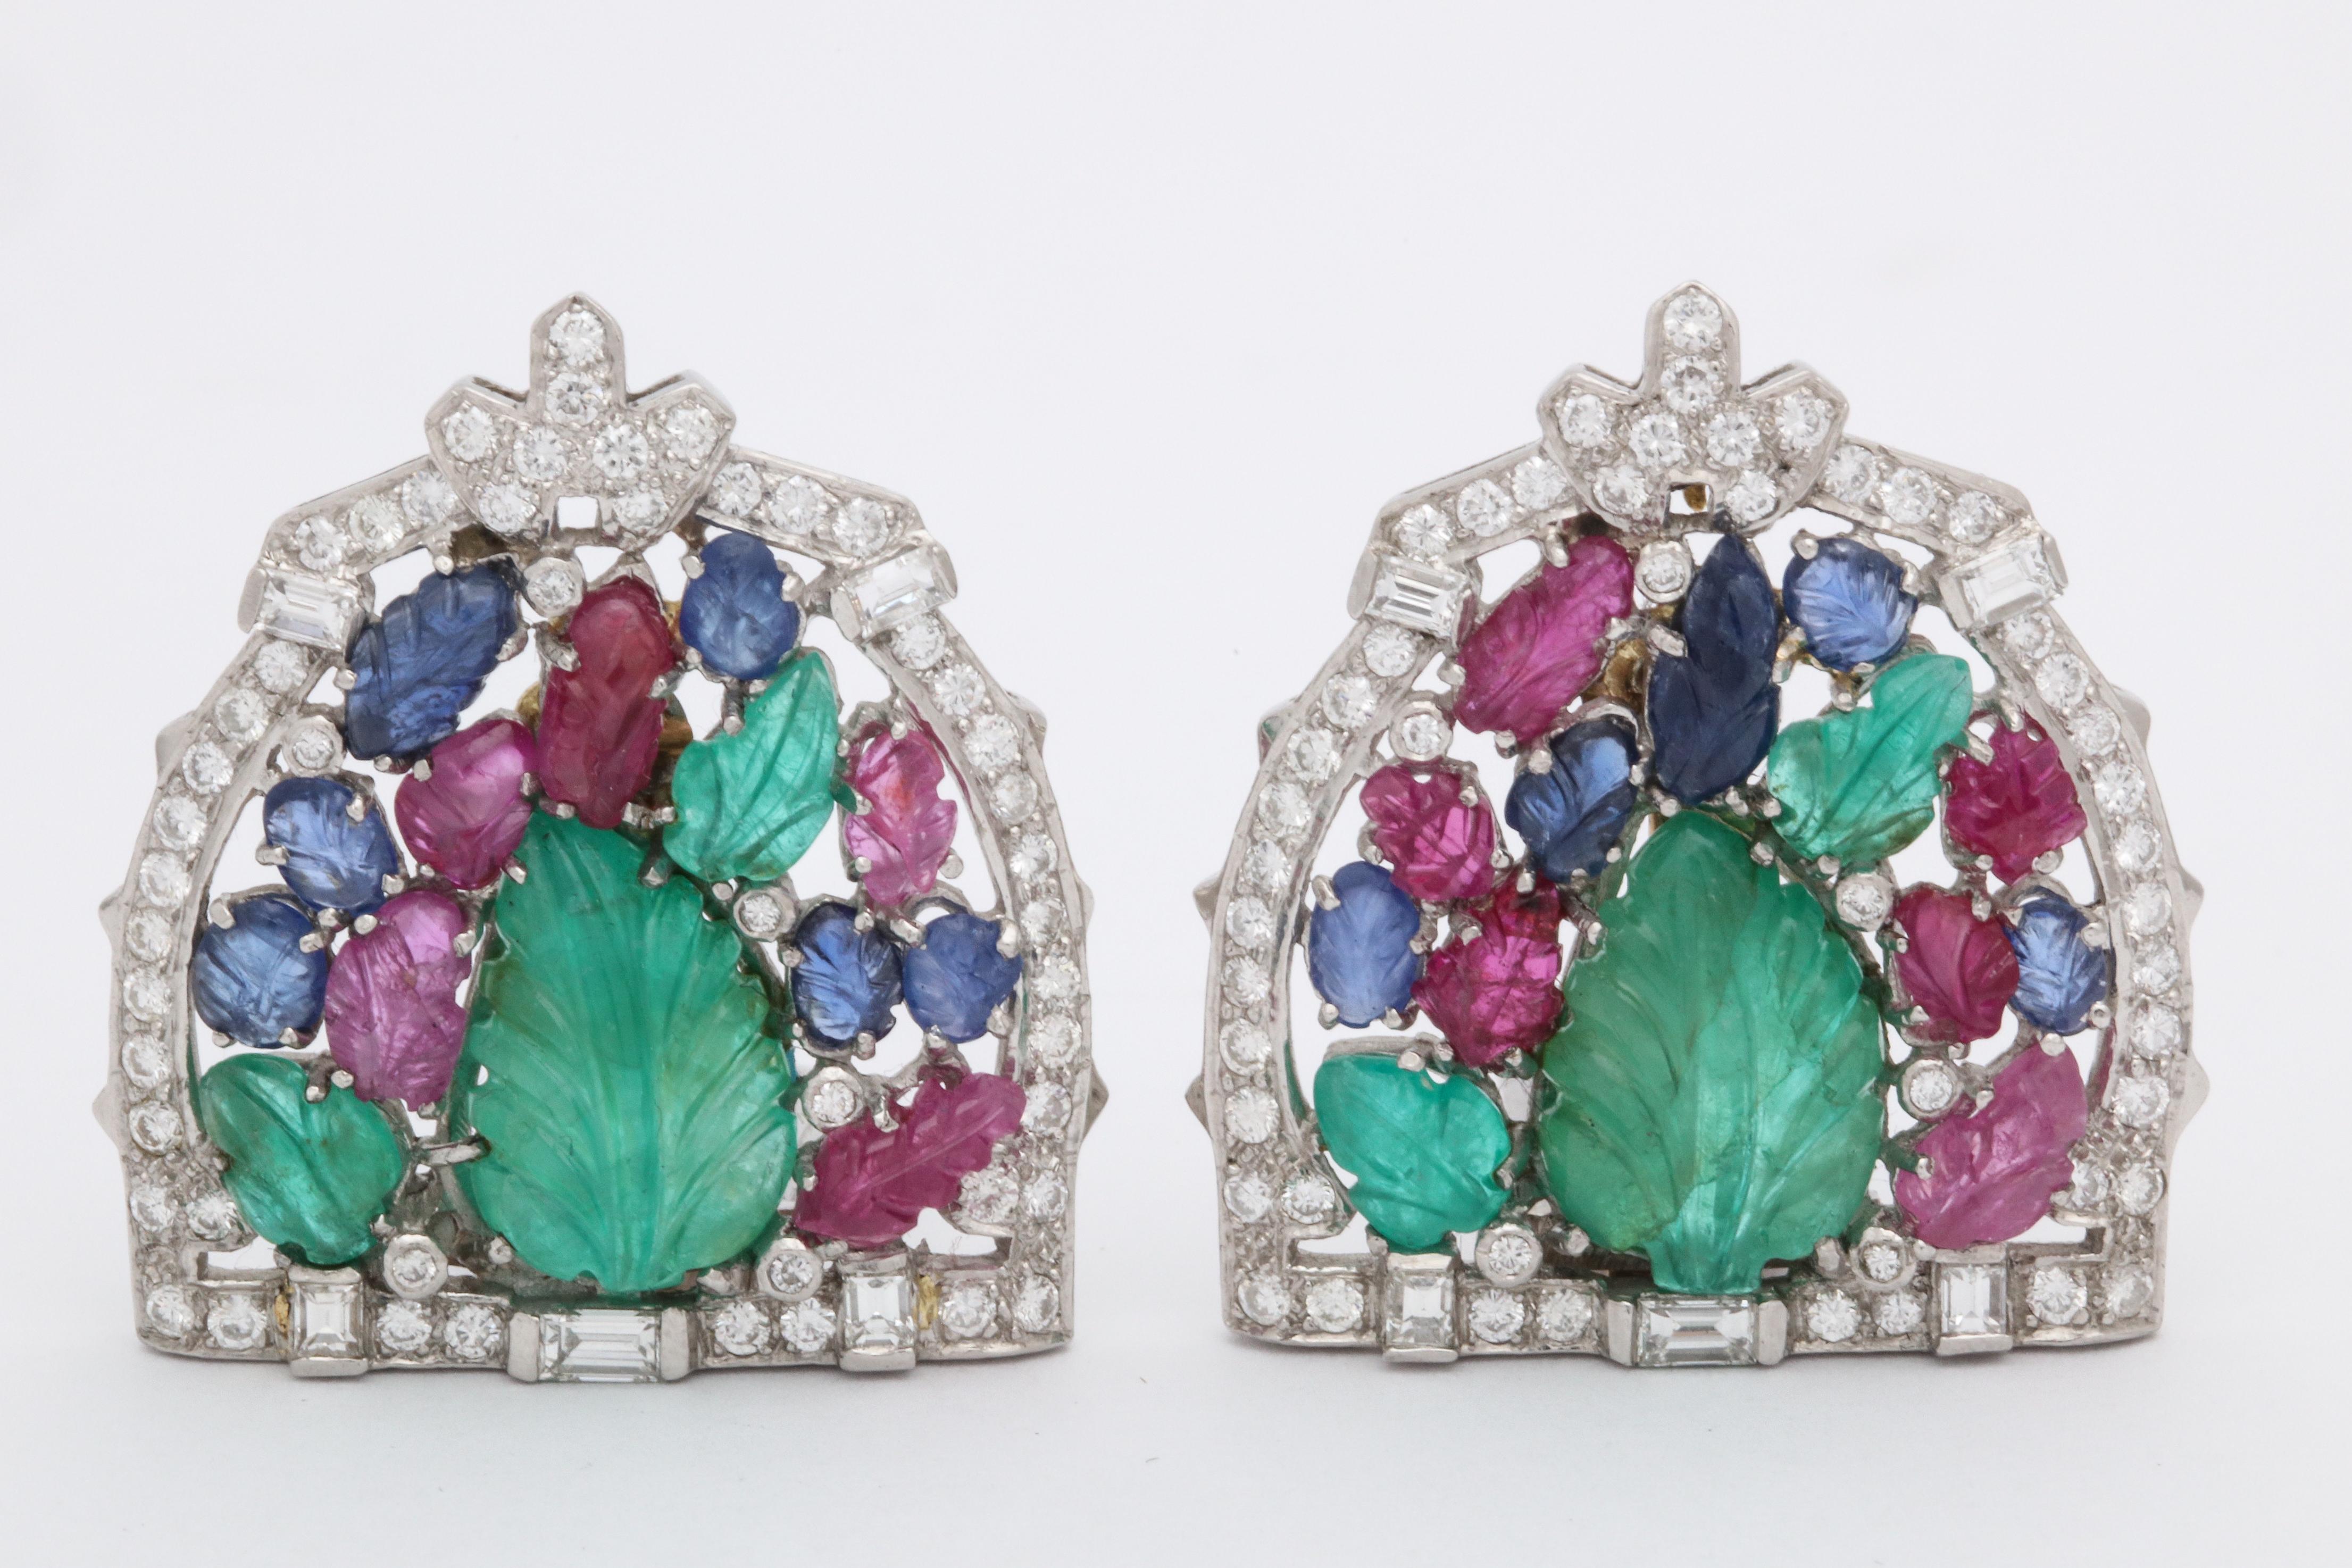 One Pair Of Ladies Platinum With Gold And Platinum Retractable Posts Earclips Embellished With Multicolored Carved Emeralds,Rubies And Sapphires. Earclips Further Embellished With Numerous Antique Cut Diamonds Weighing Approximately [2.5] Cts.